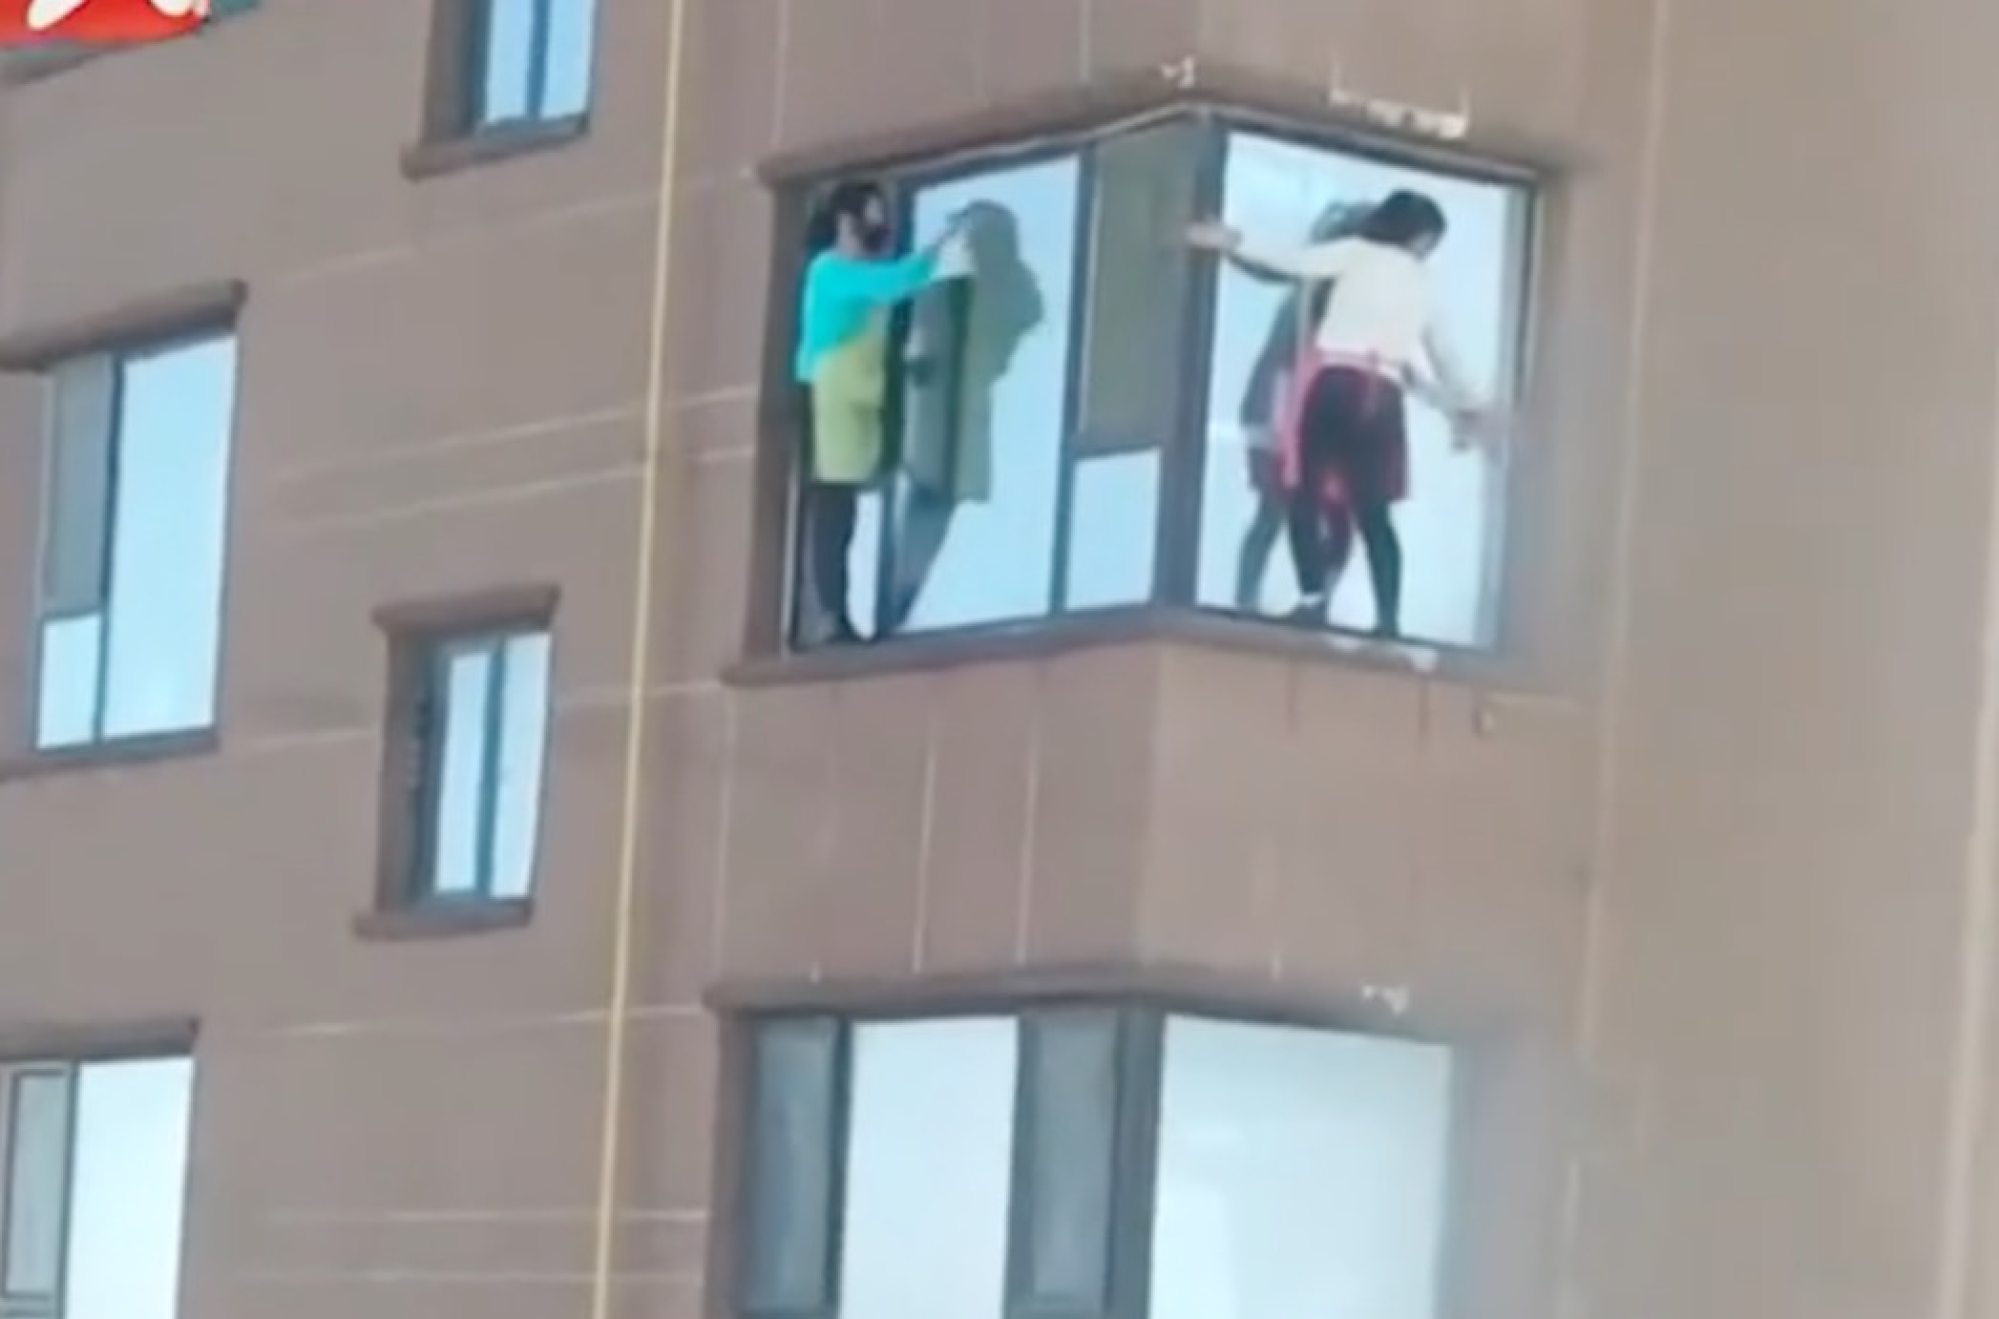 ‘It seems like their lives are cheaper than safety gear which only costs a few dozen yuan’, says one online commenter after watching the video. Photo: The Paper